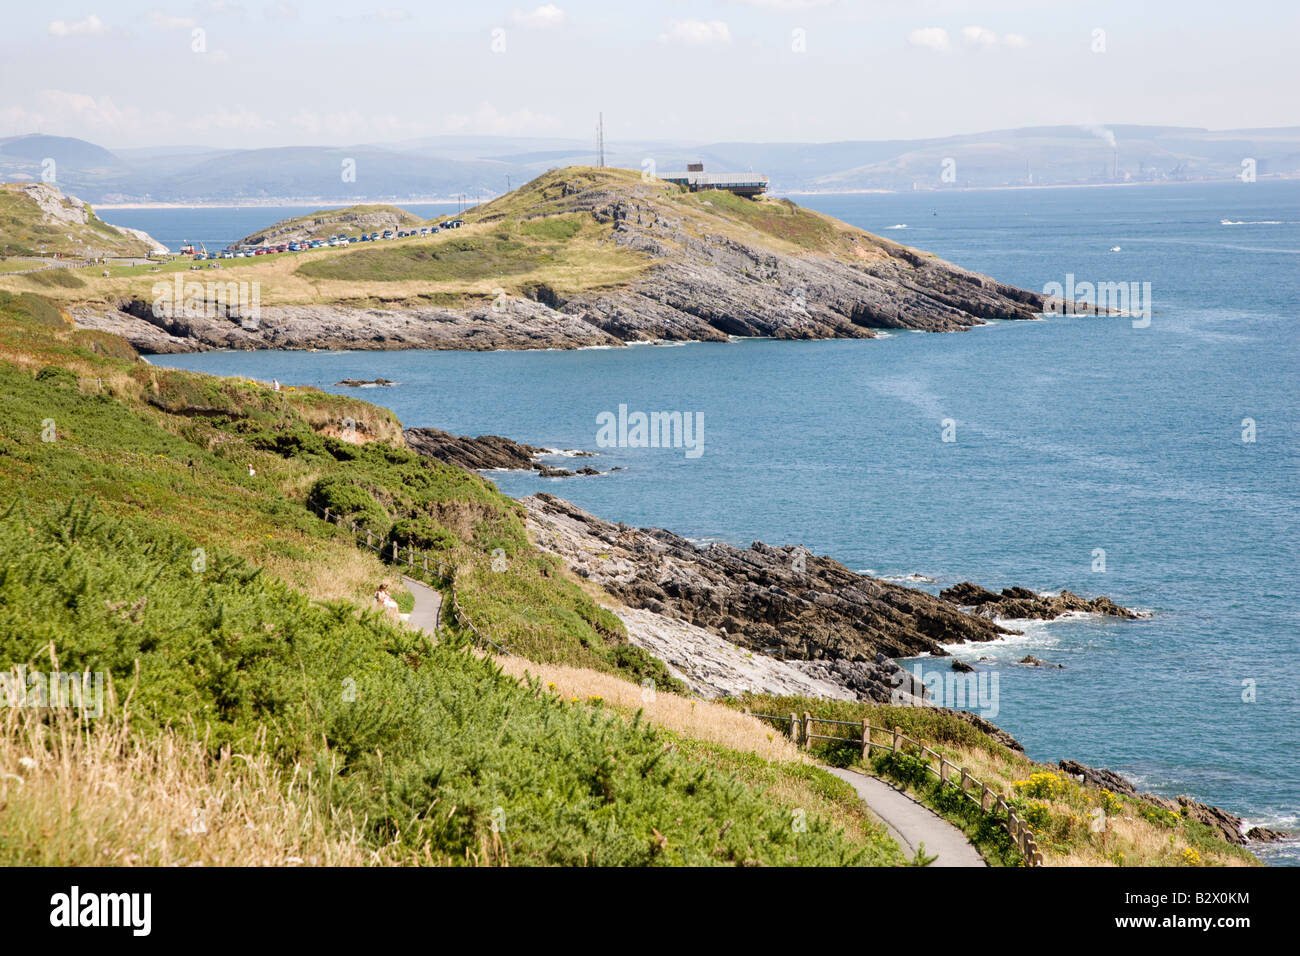 Mumbles Wales High Resolution Stock Photography and Images - Alamy